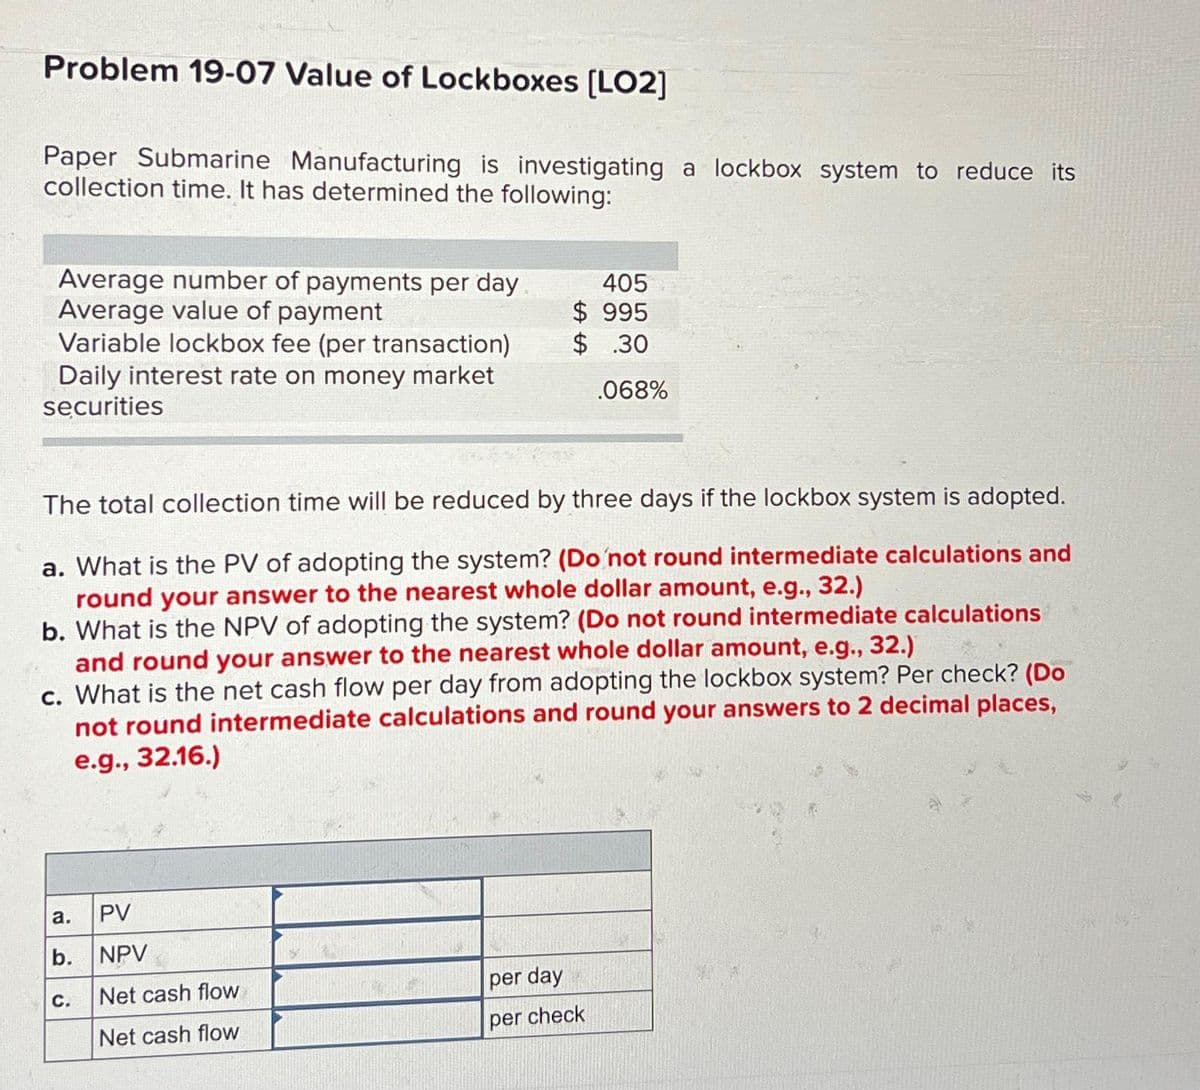 Problem 19-07 Value of Lockboxes [LO2]
Paper Submarine Manufacturing is investigating a lockbox system to reduce its
collection time. It has determined the following:
Average number of payments per day
Average value of payment
Variable lockbox fee (per transaction)
Daily interest rate on money market
securities
a.
The total collection time will be reduced by three days if the lockbox system is adopted.
a. What is the PV of adopting the system? (Do not round intermediate calculations and
round your answer to the nearest whole dollar amount, e.g., 32.)
b. What is the NPV of adopting the system? (Do not round intermediate calculations
and round your answer to the nearest whole dollar amount, e.g., 32.)
c. What is the net cash flow per day from adopting the lockbox system? Per check? (Do
not round intermediate calculations and round your answers to 2 decimal places,
e.g., 32.16.)
b.
C.
405
$995
$.30
PV
NPV
Net cash flow
Net cash flow
.068%
per day
per check